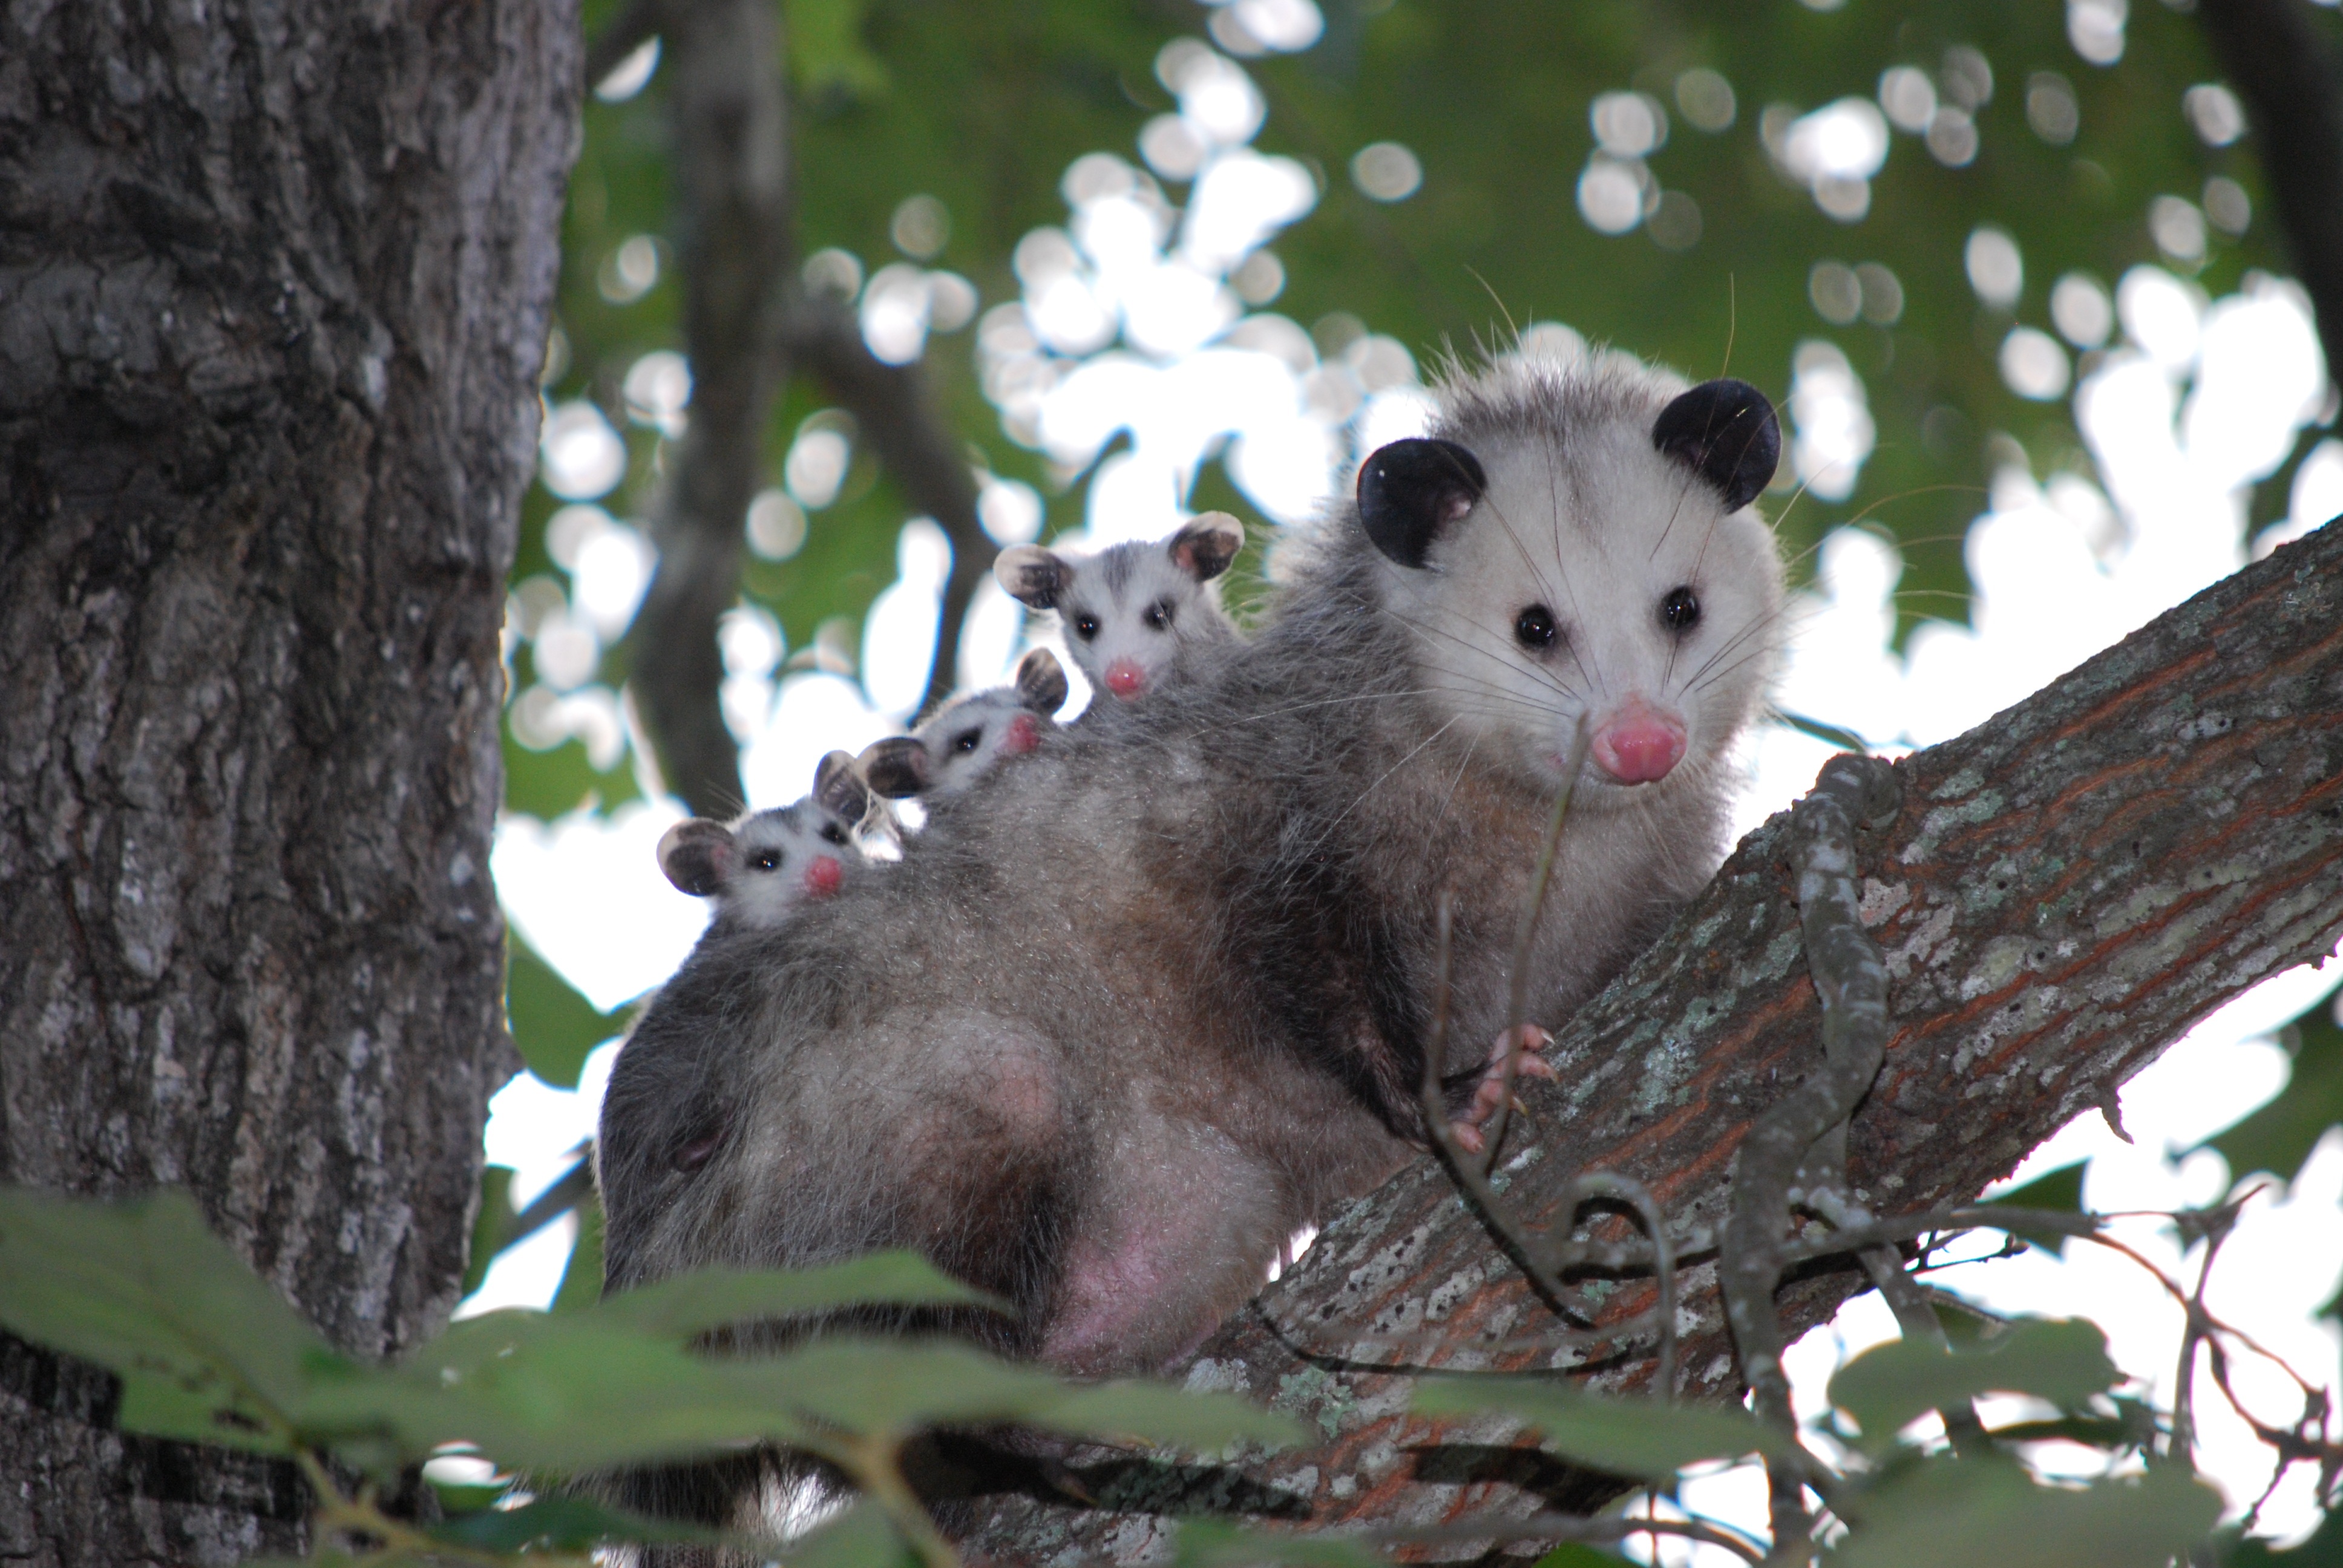 Female opossum in tree with young on her back